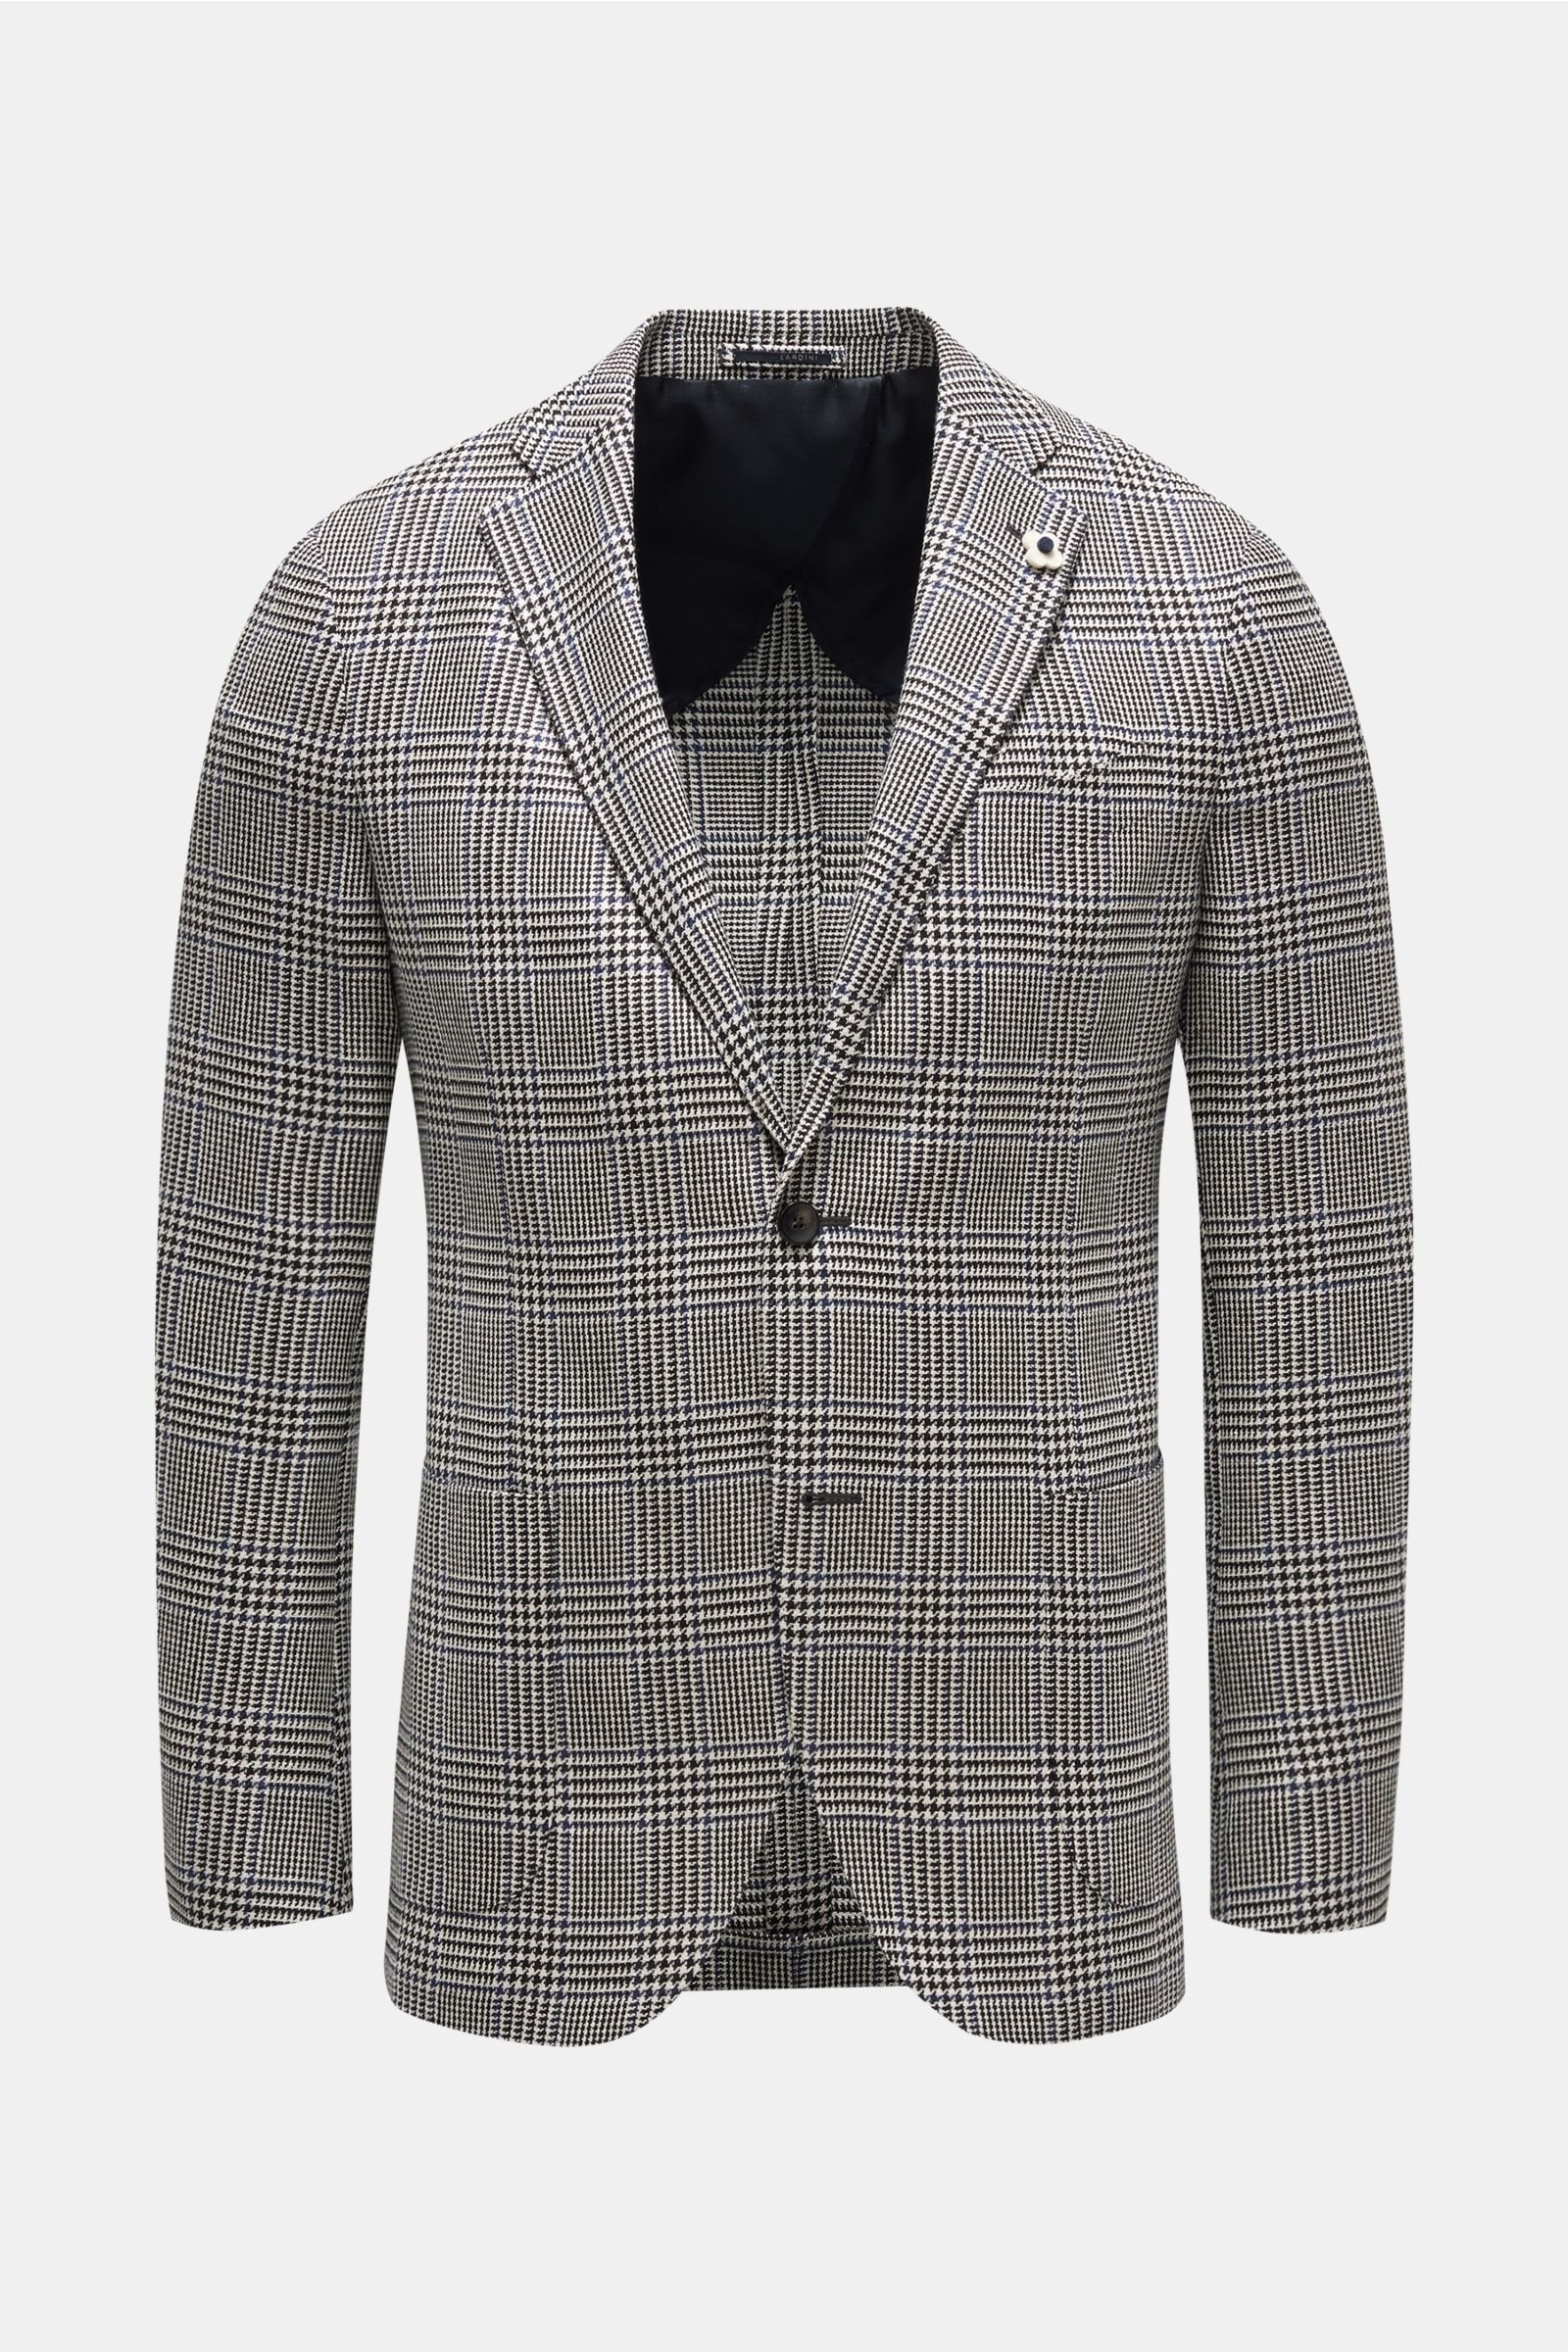 Smart-casual jacket black/off-white checked